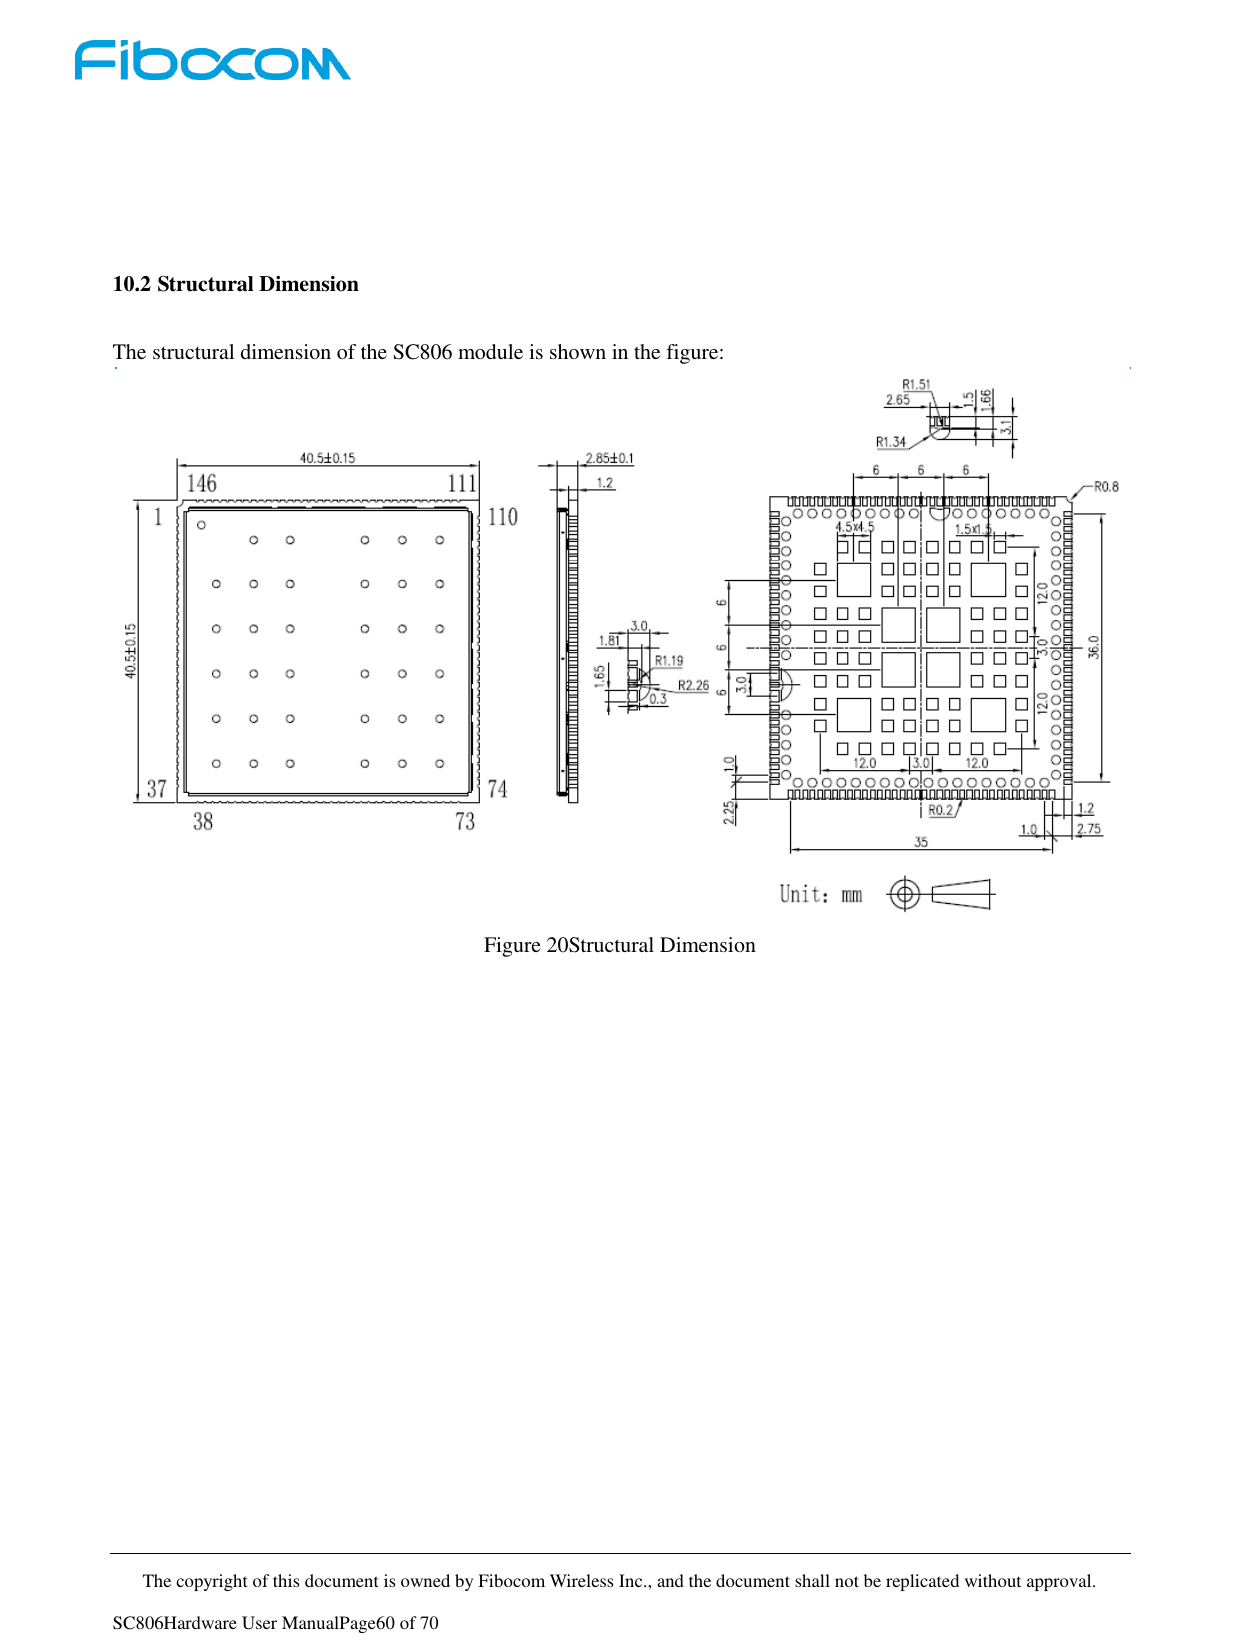     The copyright of this document is owned by Fibocom Wireless Inc., and the document shall not be replicated without approval.   SC806Hardware User ManualPage60 of 70    10.2 Structural Dimension The structural dimension of the SC806 module is shown in the figure:  Figure 20Structural Dimension 